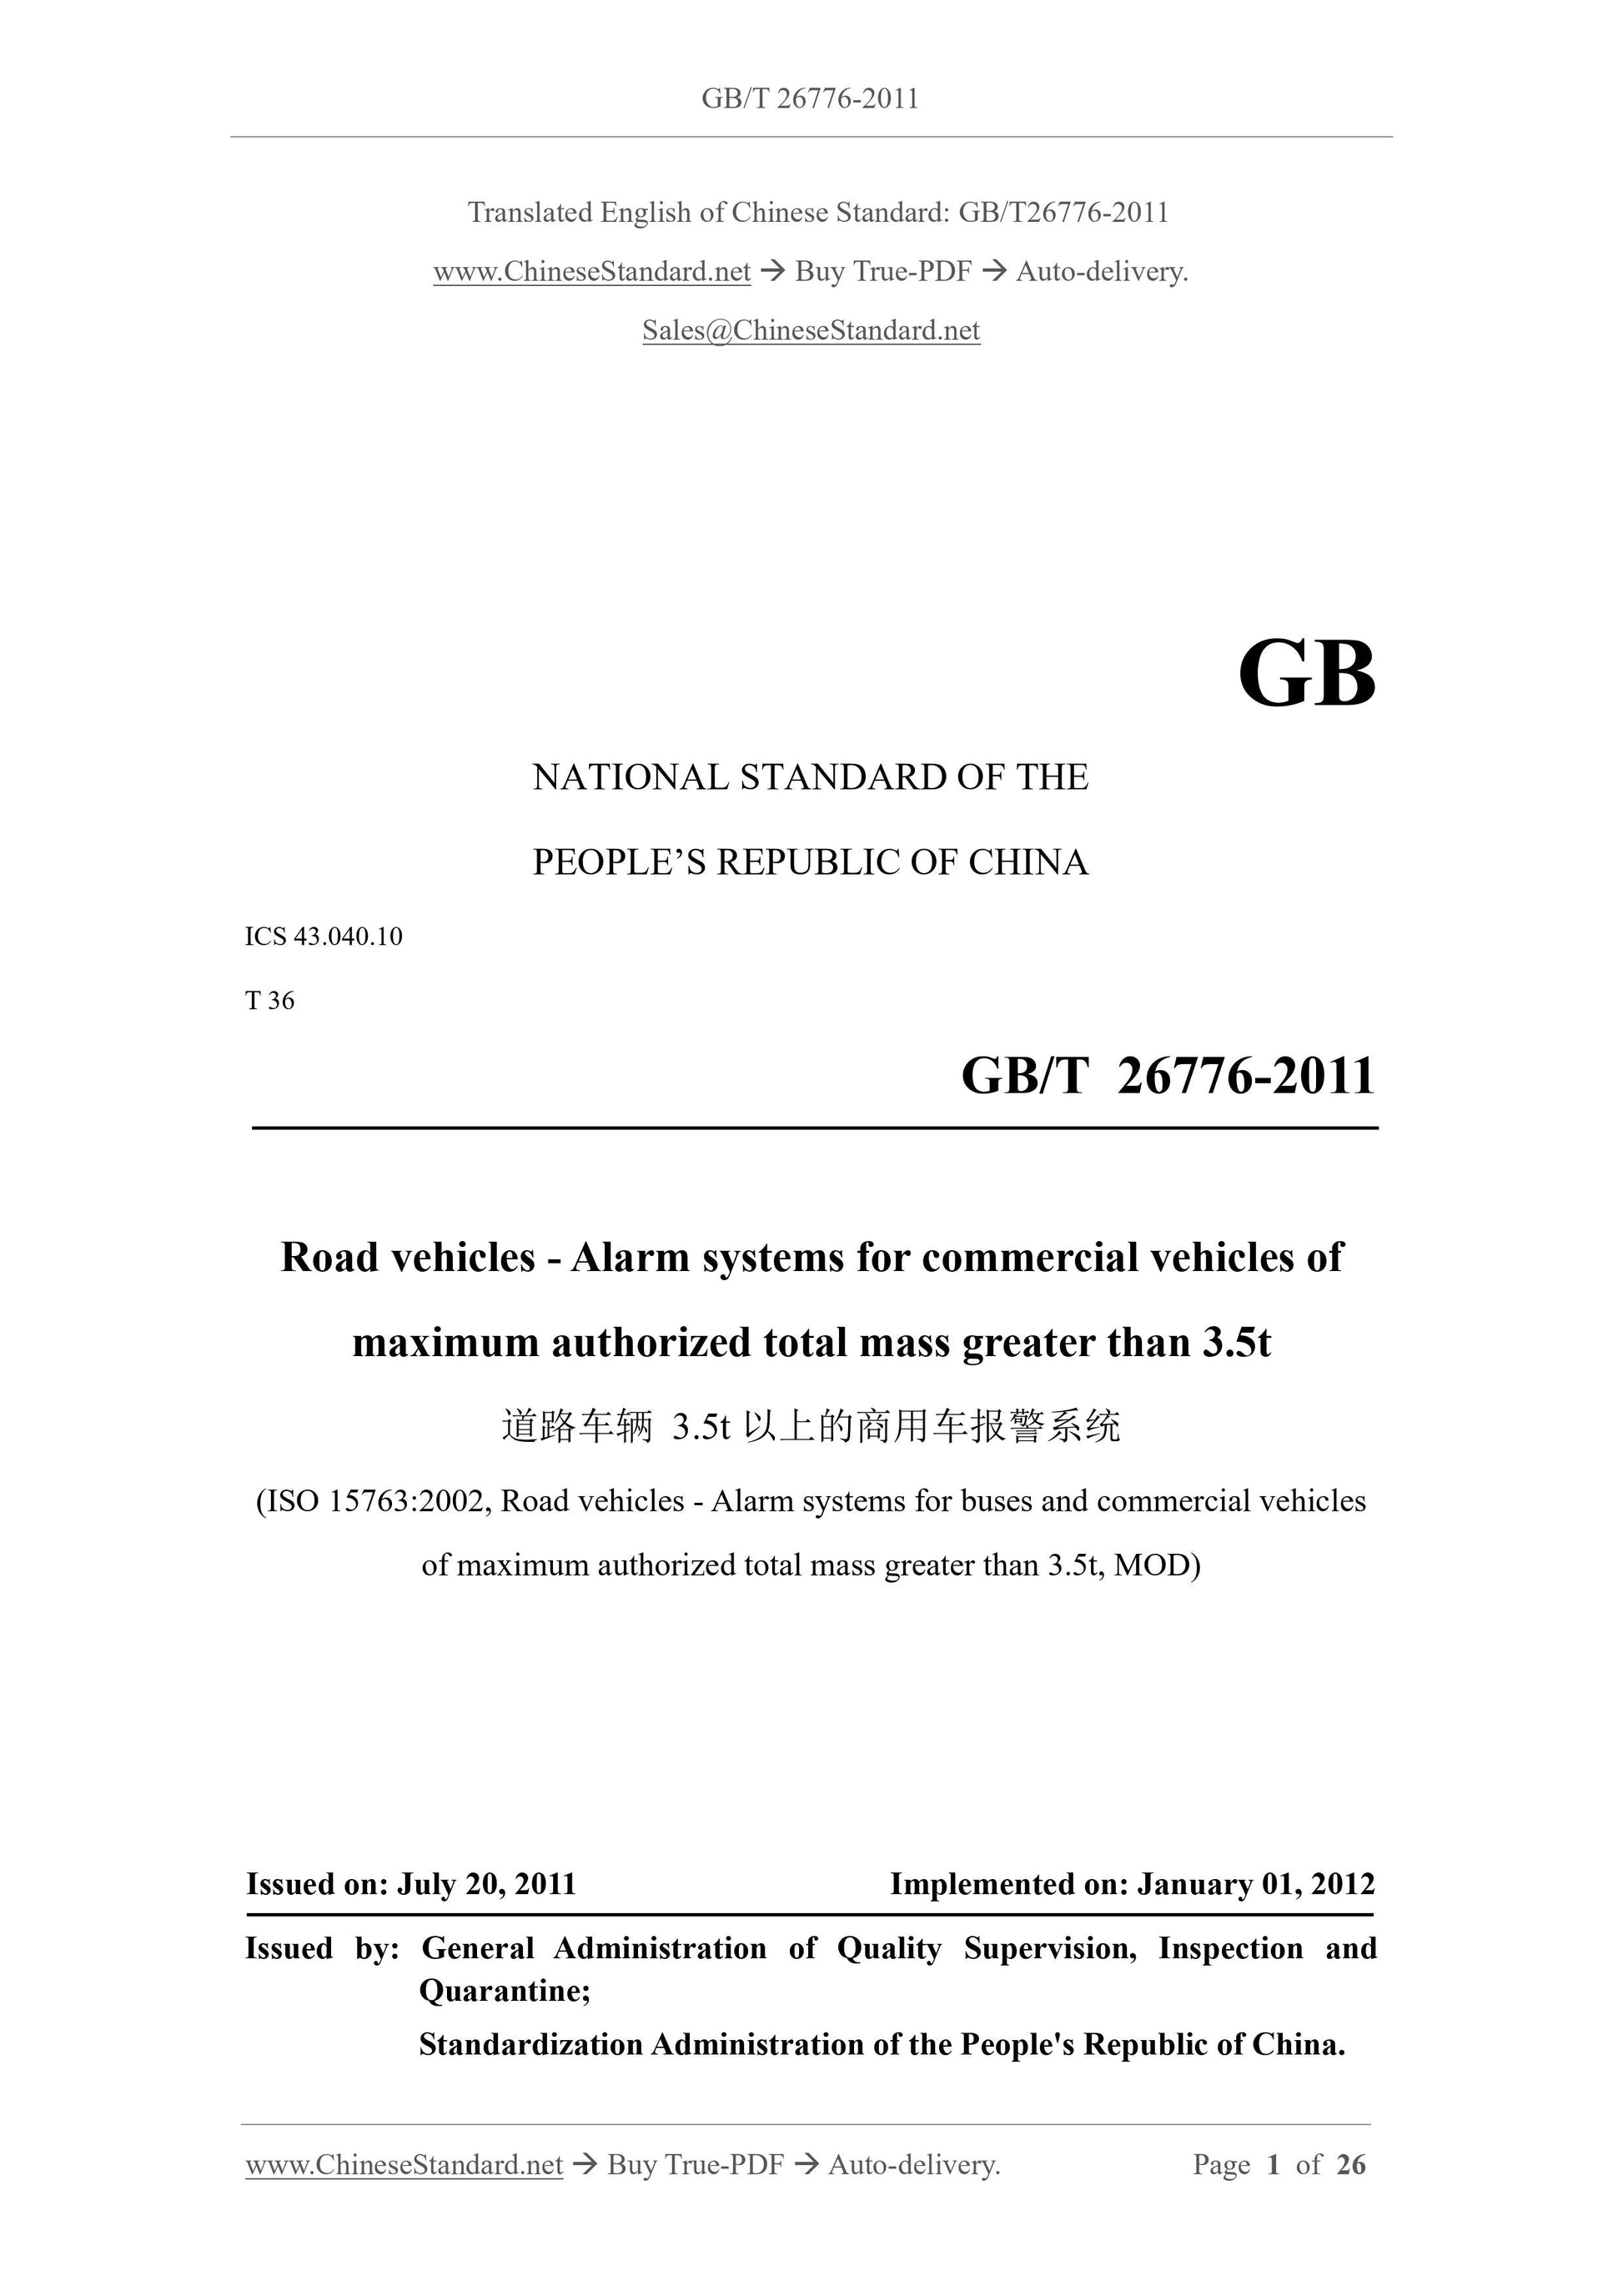 GB/T 26776-2011 Page 1